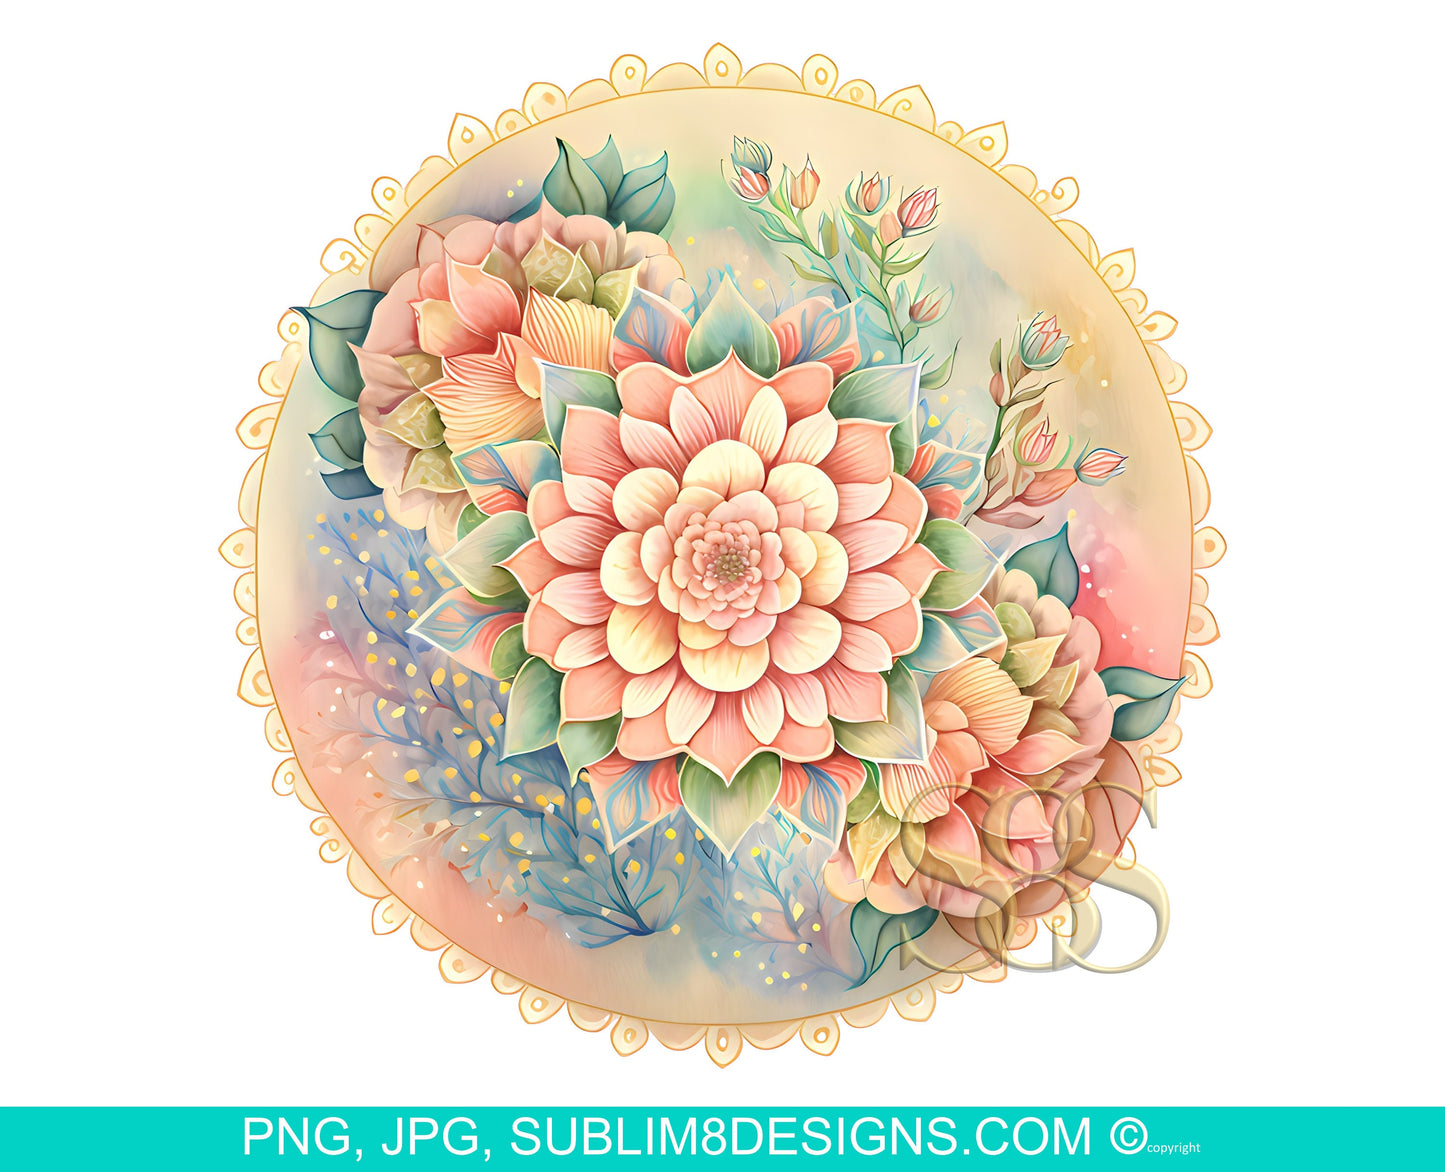 Peachy Serenity: A Pastel Watercolor Mandala Flower Sublimation Design PNG and JPEG ONLY